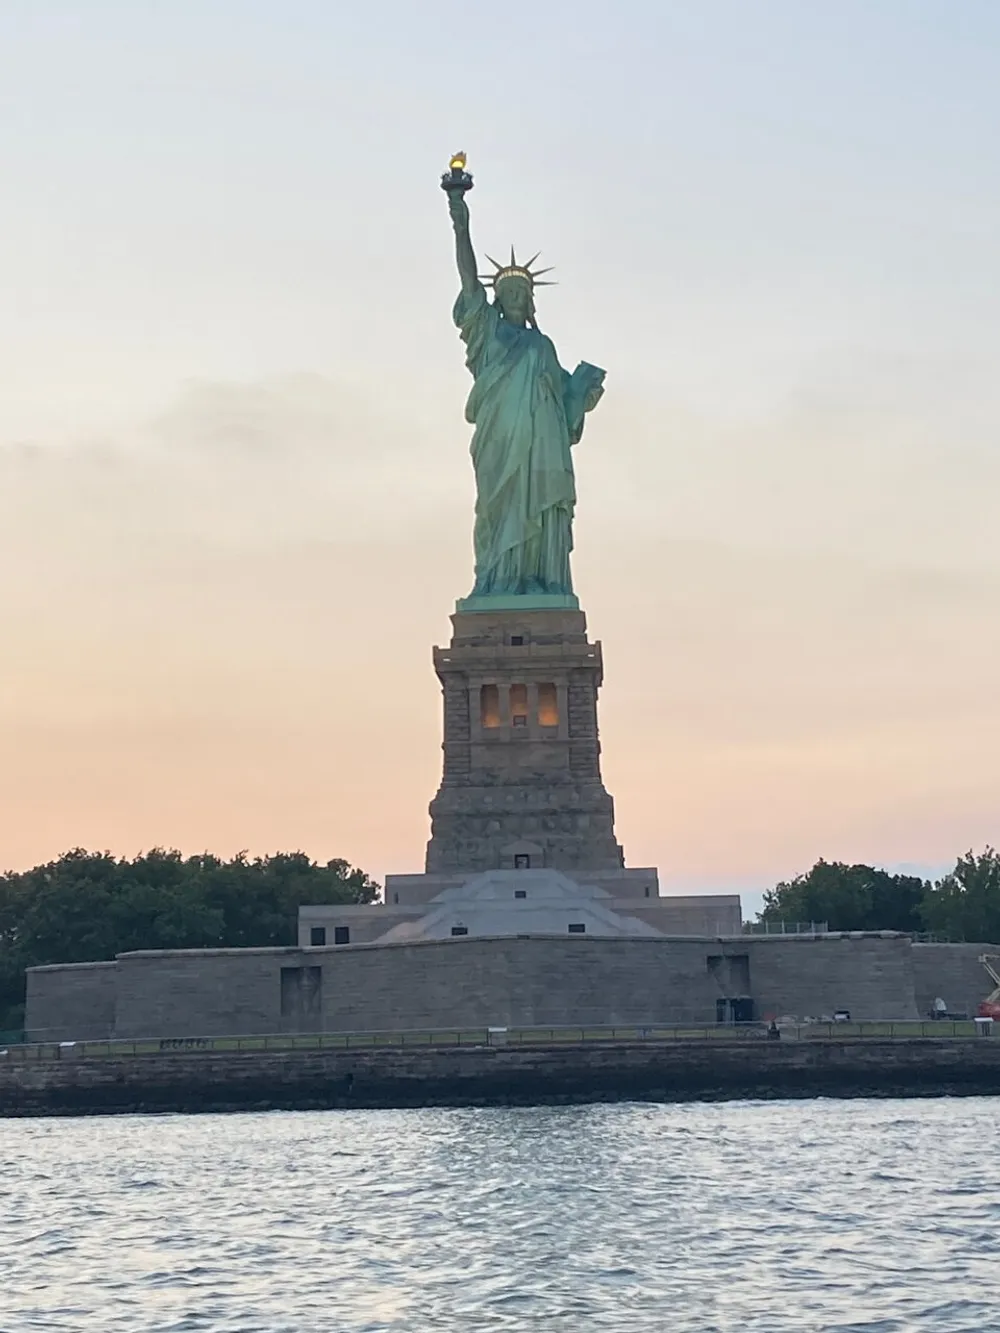 The Statue of Liberty stands tall against a dusky sky symbolizing freedom and welcoming visitors at a waterfront location